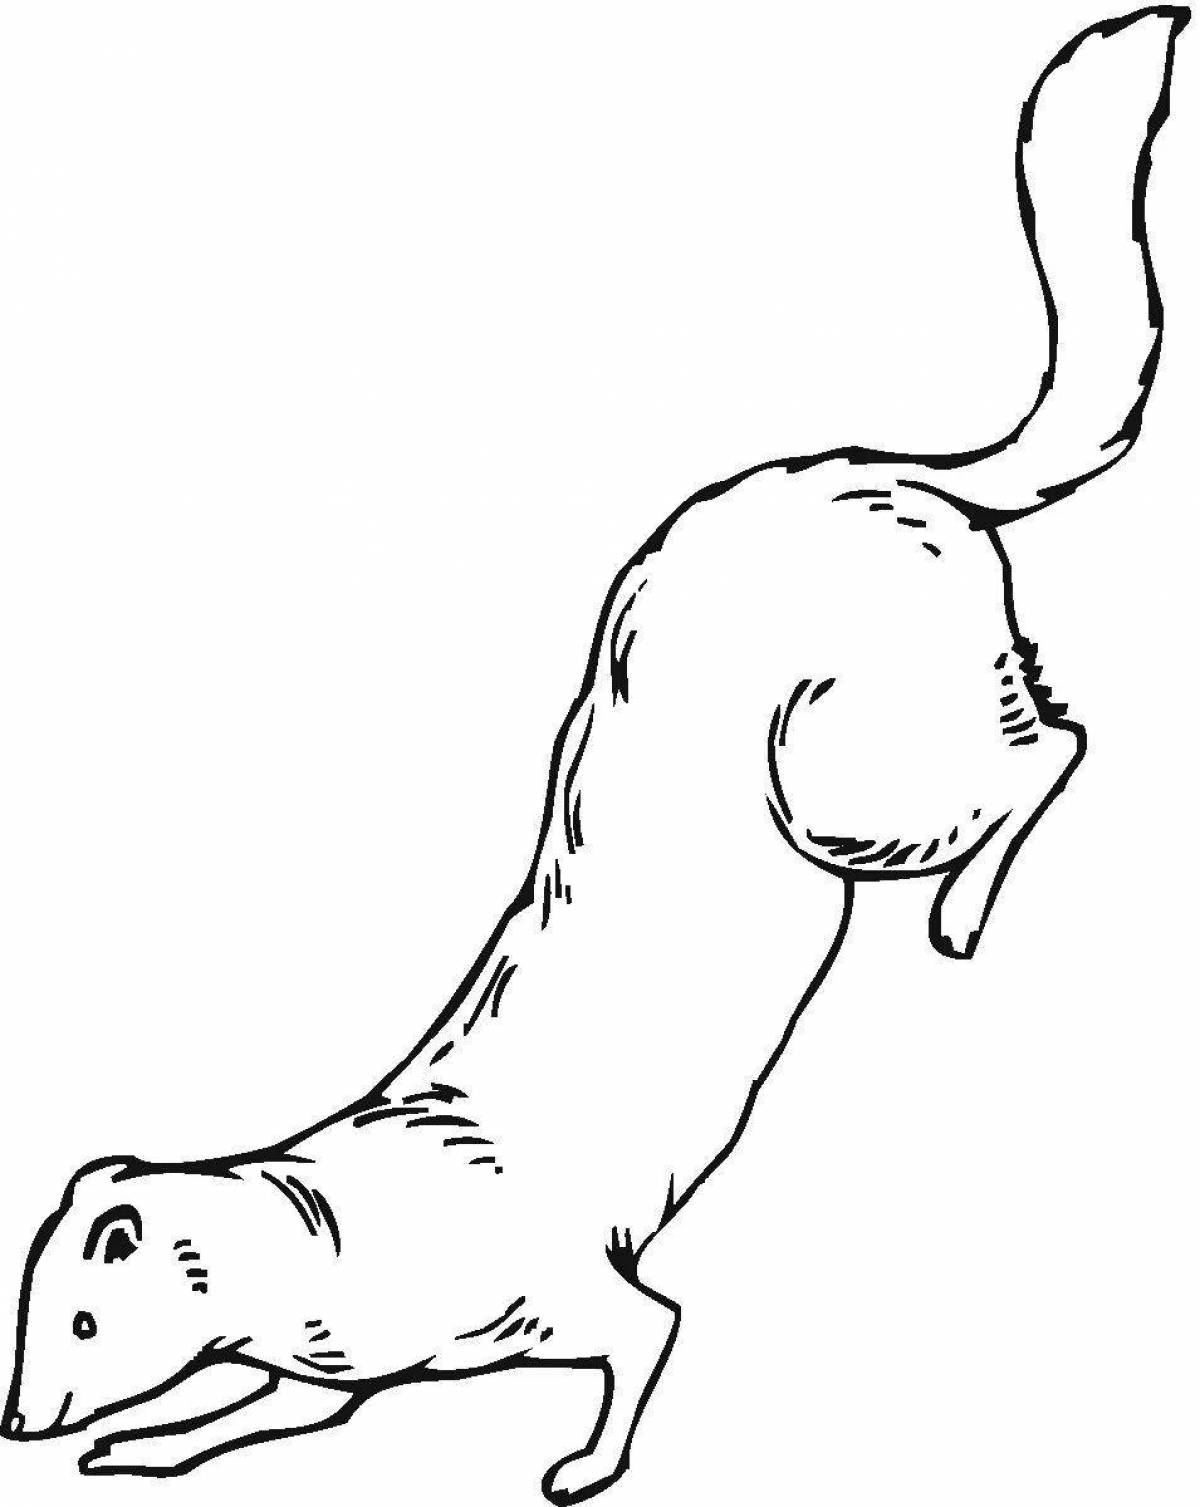 Exquisite weasel coloring book for kids